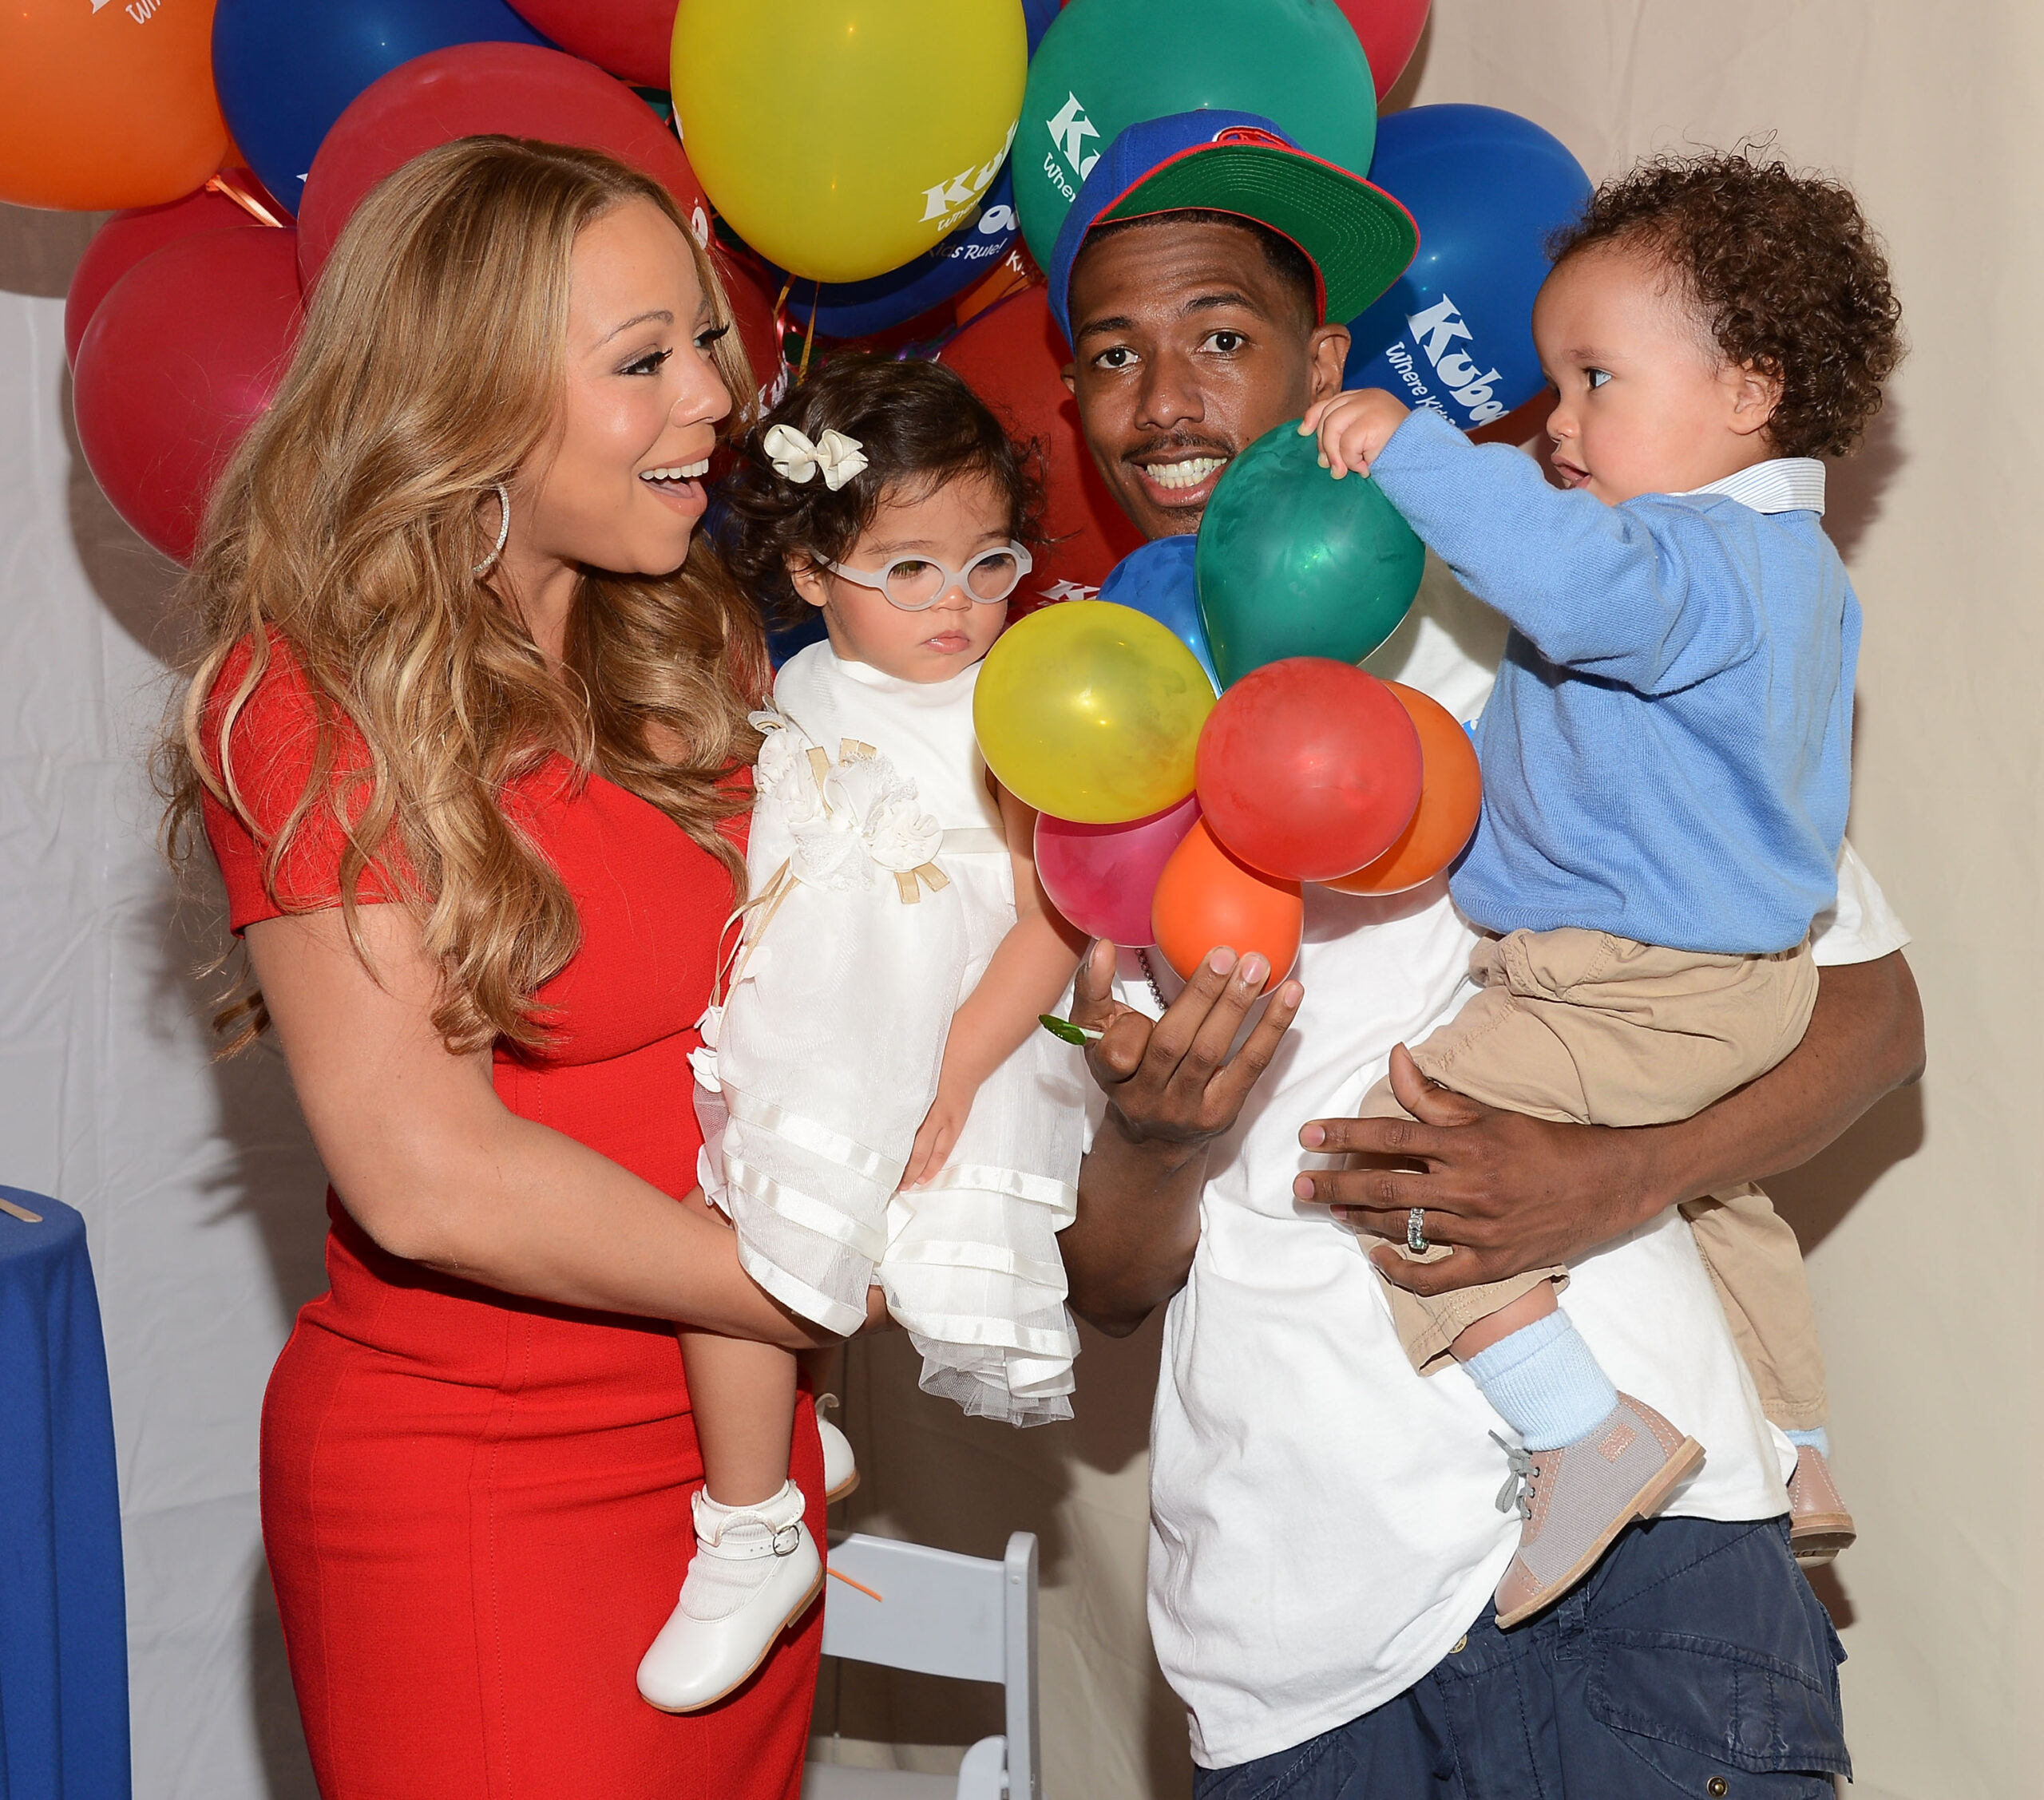 Mariah Carey, Nick Cannon, and their children Monroe and Moroccan Scott attend "Family Day" on October 6, 2012, in Santa Monica, California. | Source: Getty Images